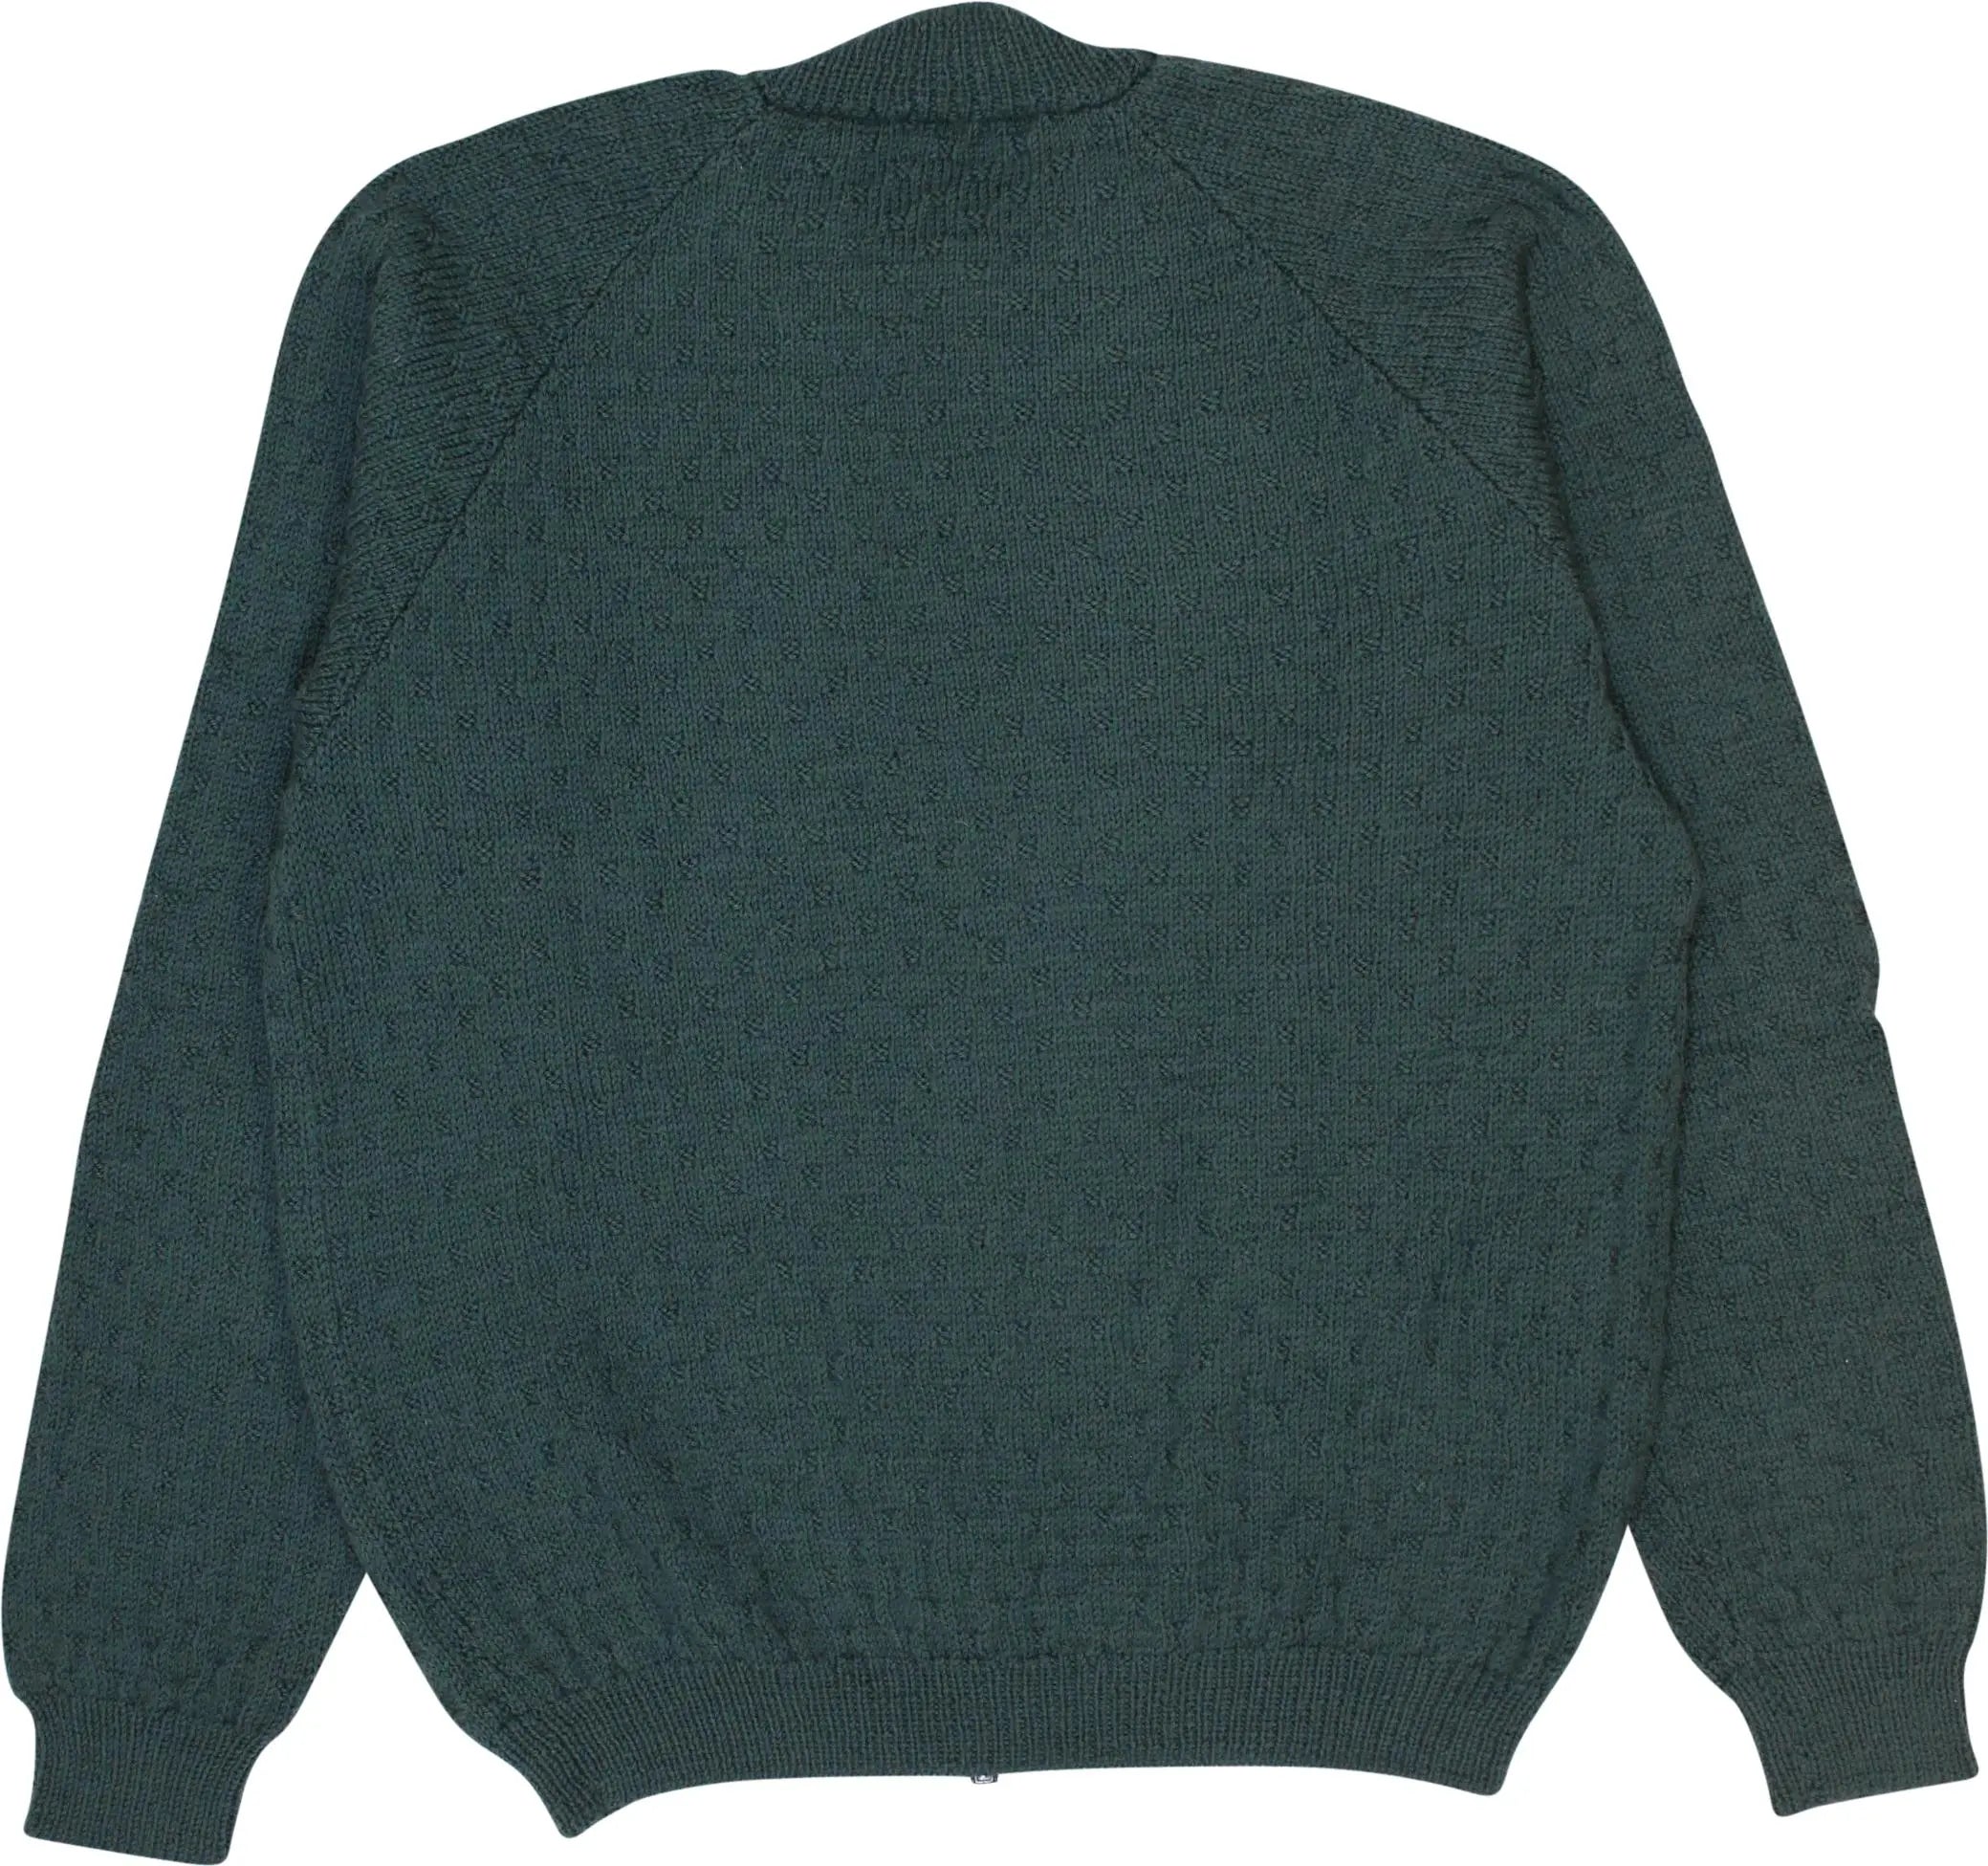 Unknown - Knitted Jumper with Zipper- ThriftTale.com - Vintage and second handclothing